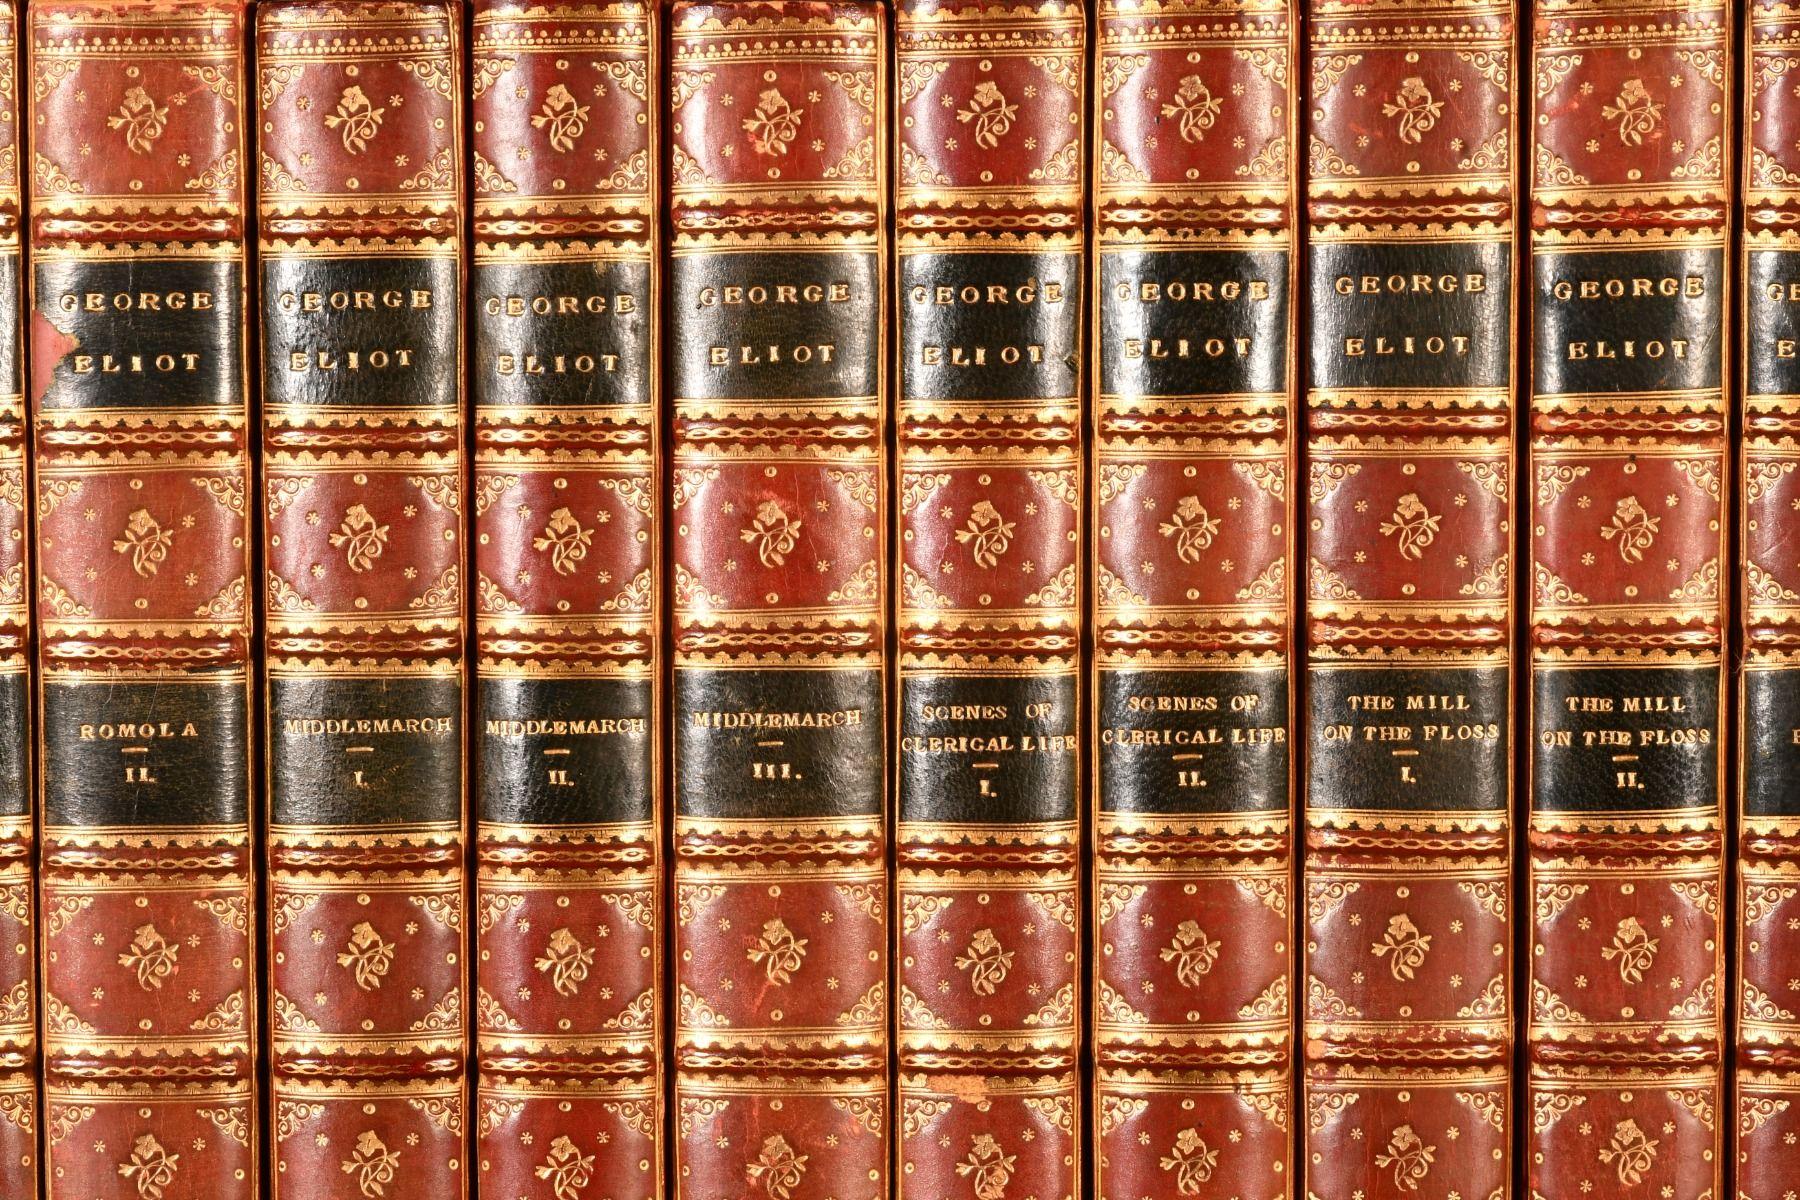 The complete Cabinet edition of the works of George Eliot in uniform calf bindings, complete in twenty-four volumes with 'The Life.'

The Cabinet edition of the works of George Eliot, complete in twenty-four volumes. Dated from a Cabinet edition set